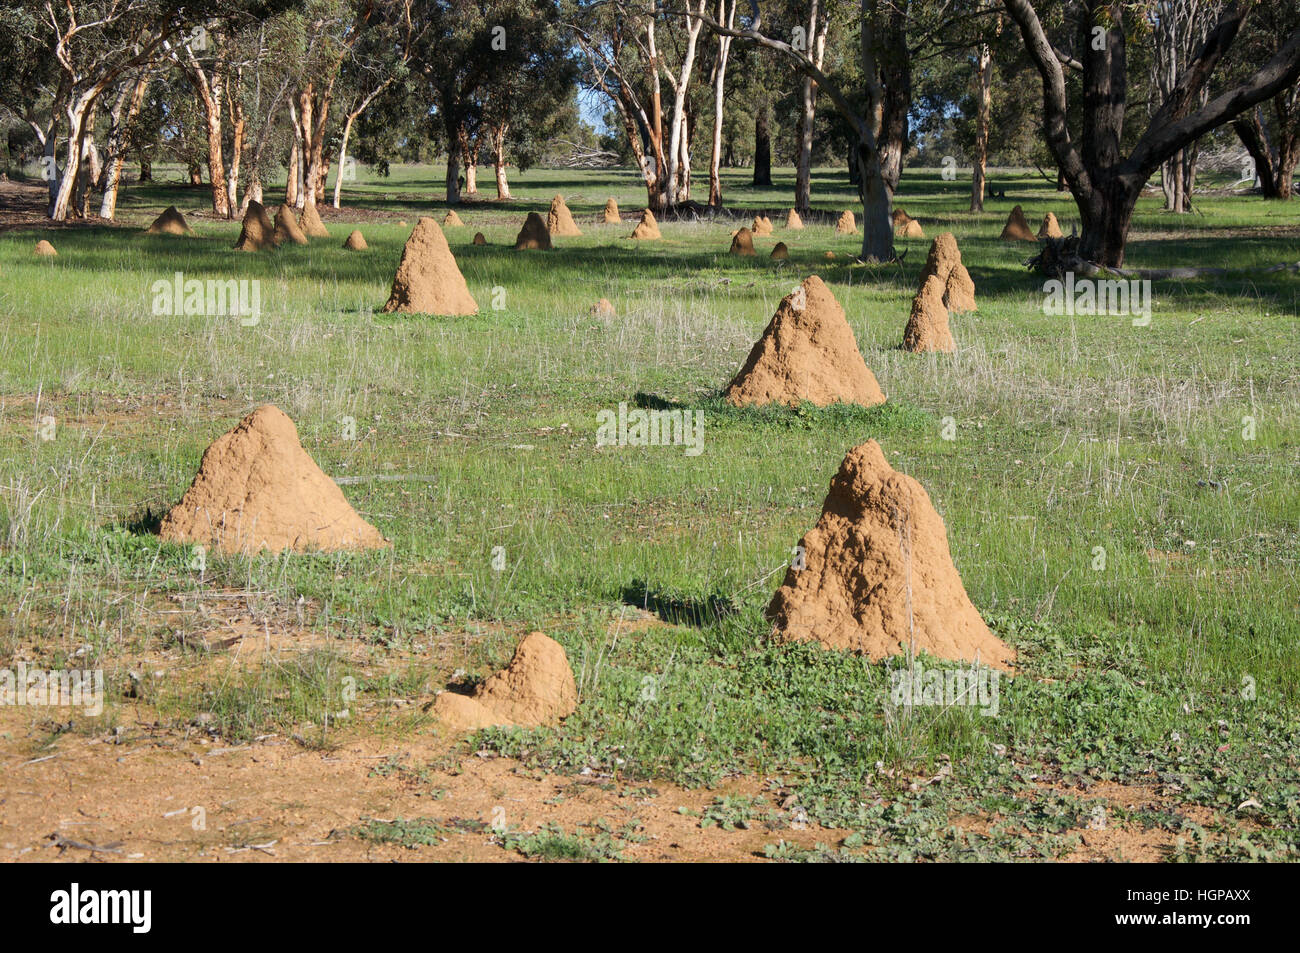 Termite mounds, insect habitats, built of red sand in rural green grass farmland of Western Australia. Stock Photo